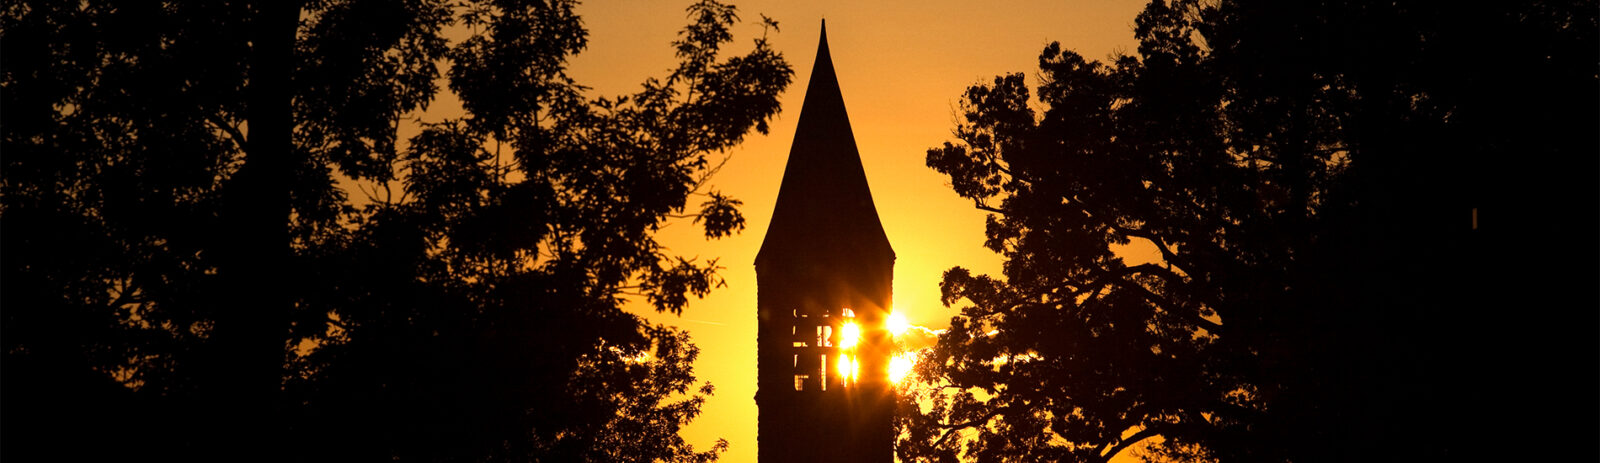 McGraw Tower with the sun setting behind it.